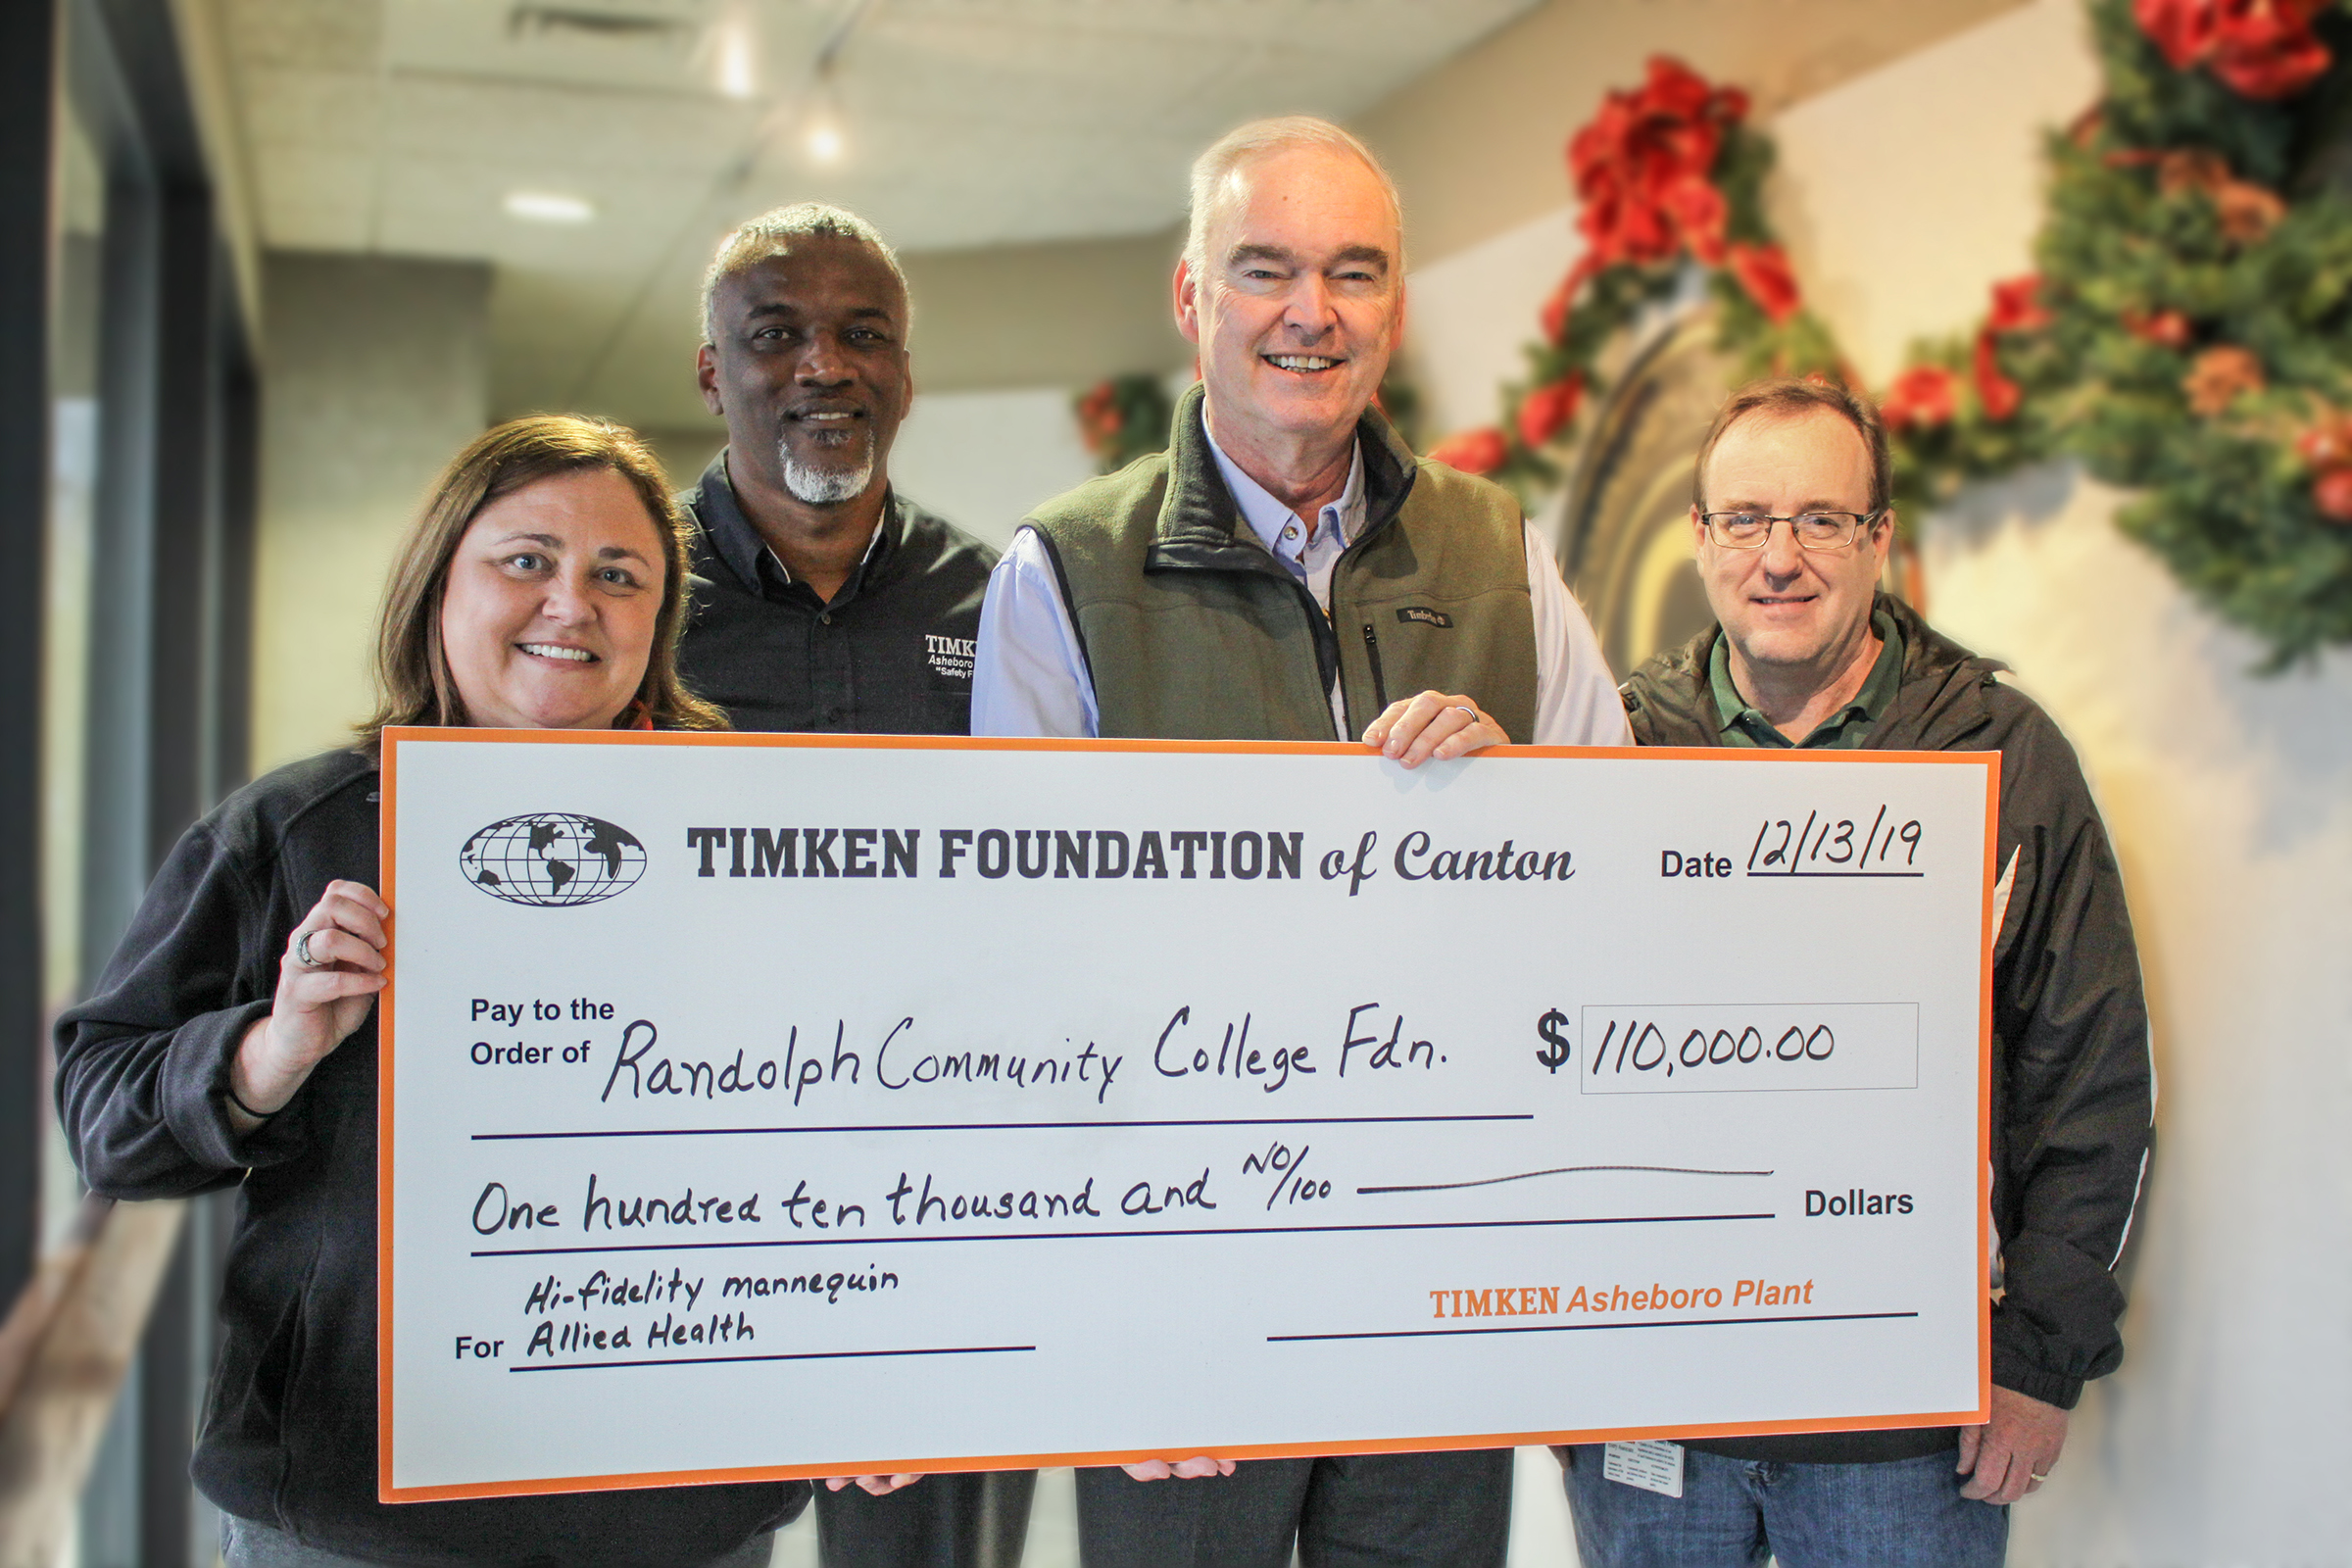 The Timken Foundation awarded a grant of $110,000 to Randolph Community College on Friday, Dec. 13, for the purchase of a hi-fidelity patient simulator mannequin for the College’s Dr. Robert S. Shackleford Jr. Allied Health Center, which will open in the spring of 2020. Pictured, left to right, are Plant Manager Megan Guinee, HR Manager Jody Walker, Shackleford, and Plant Controller Baxter Hammer.